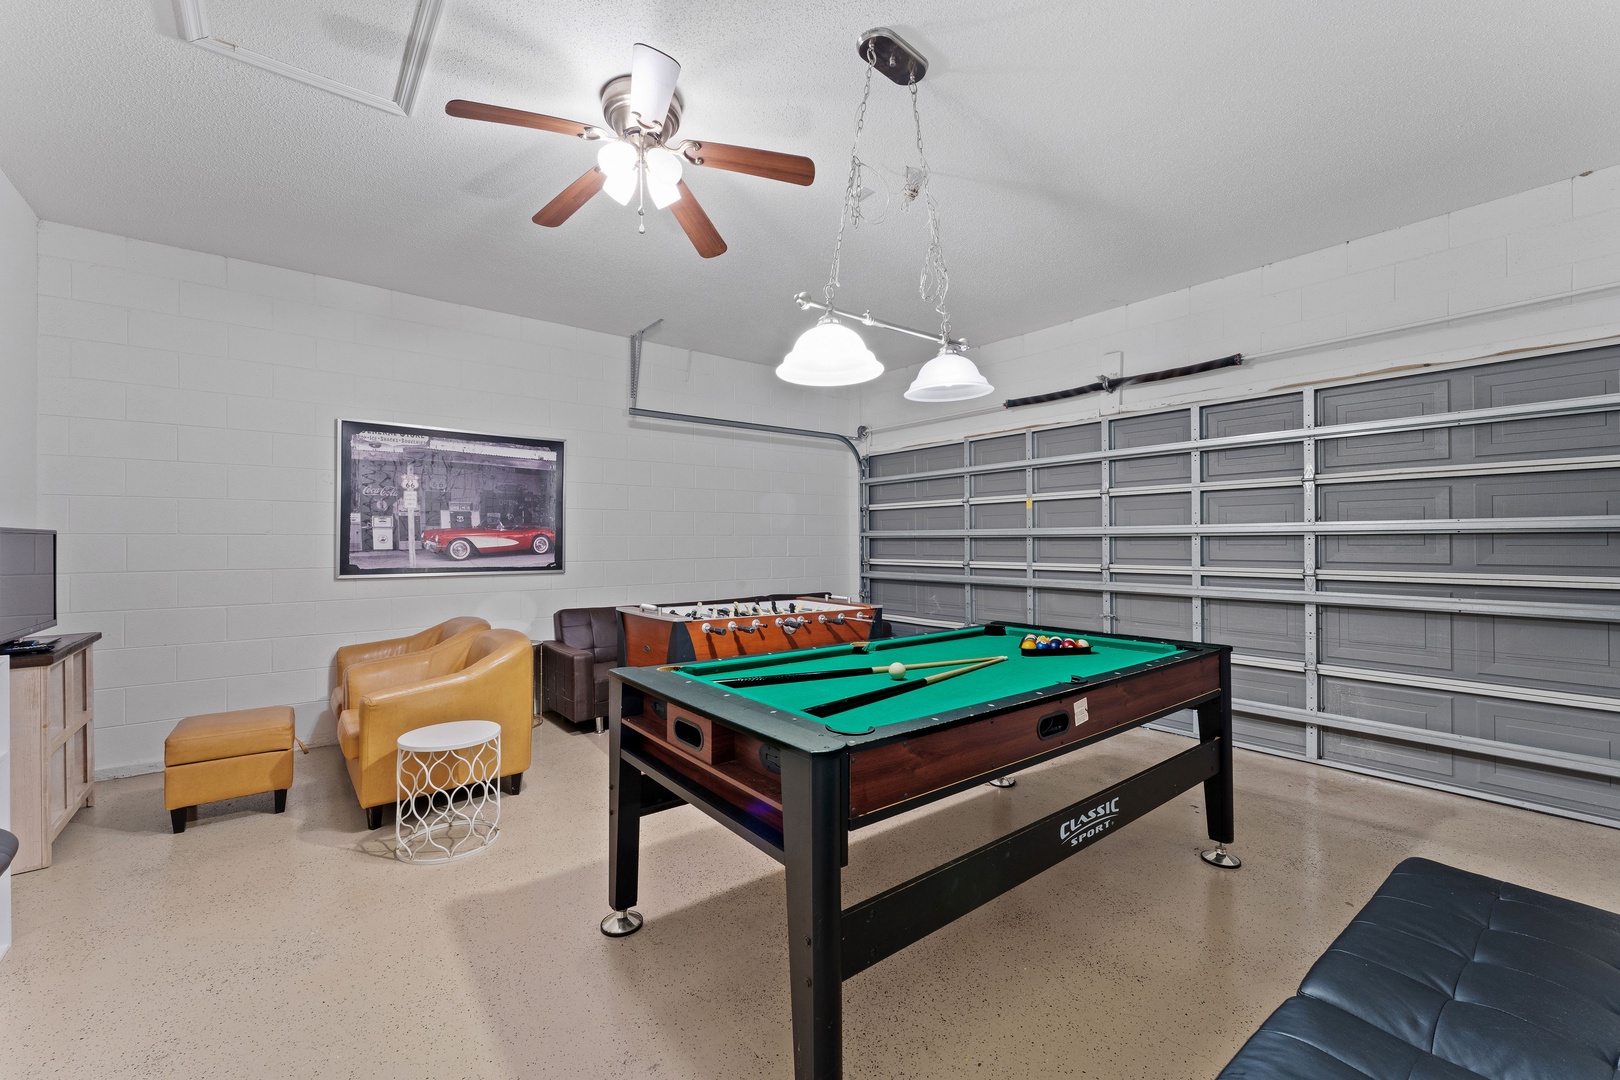 Unleash your competitive side with games in the converted garage